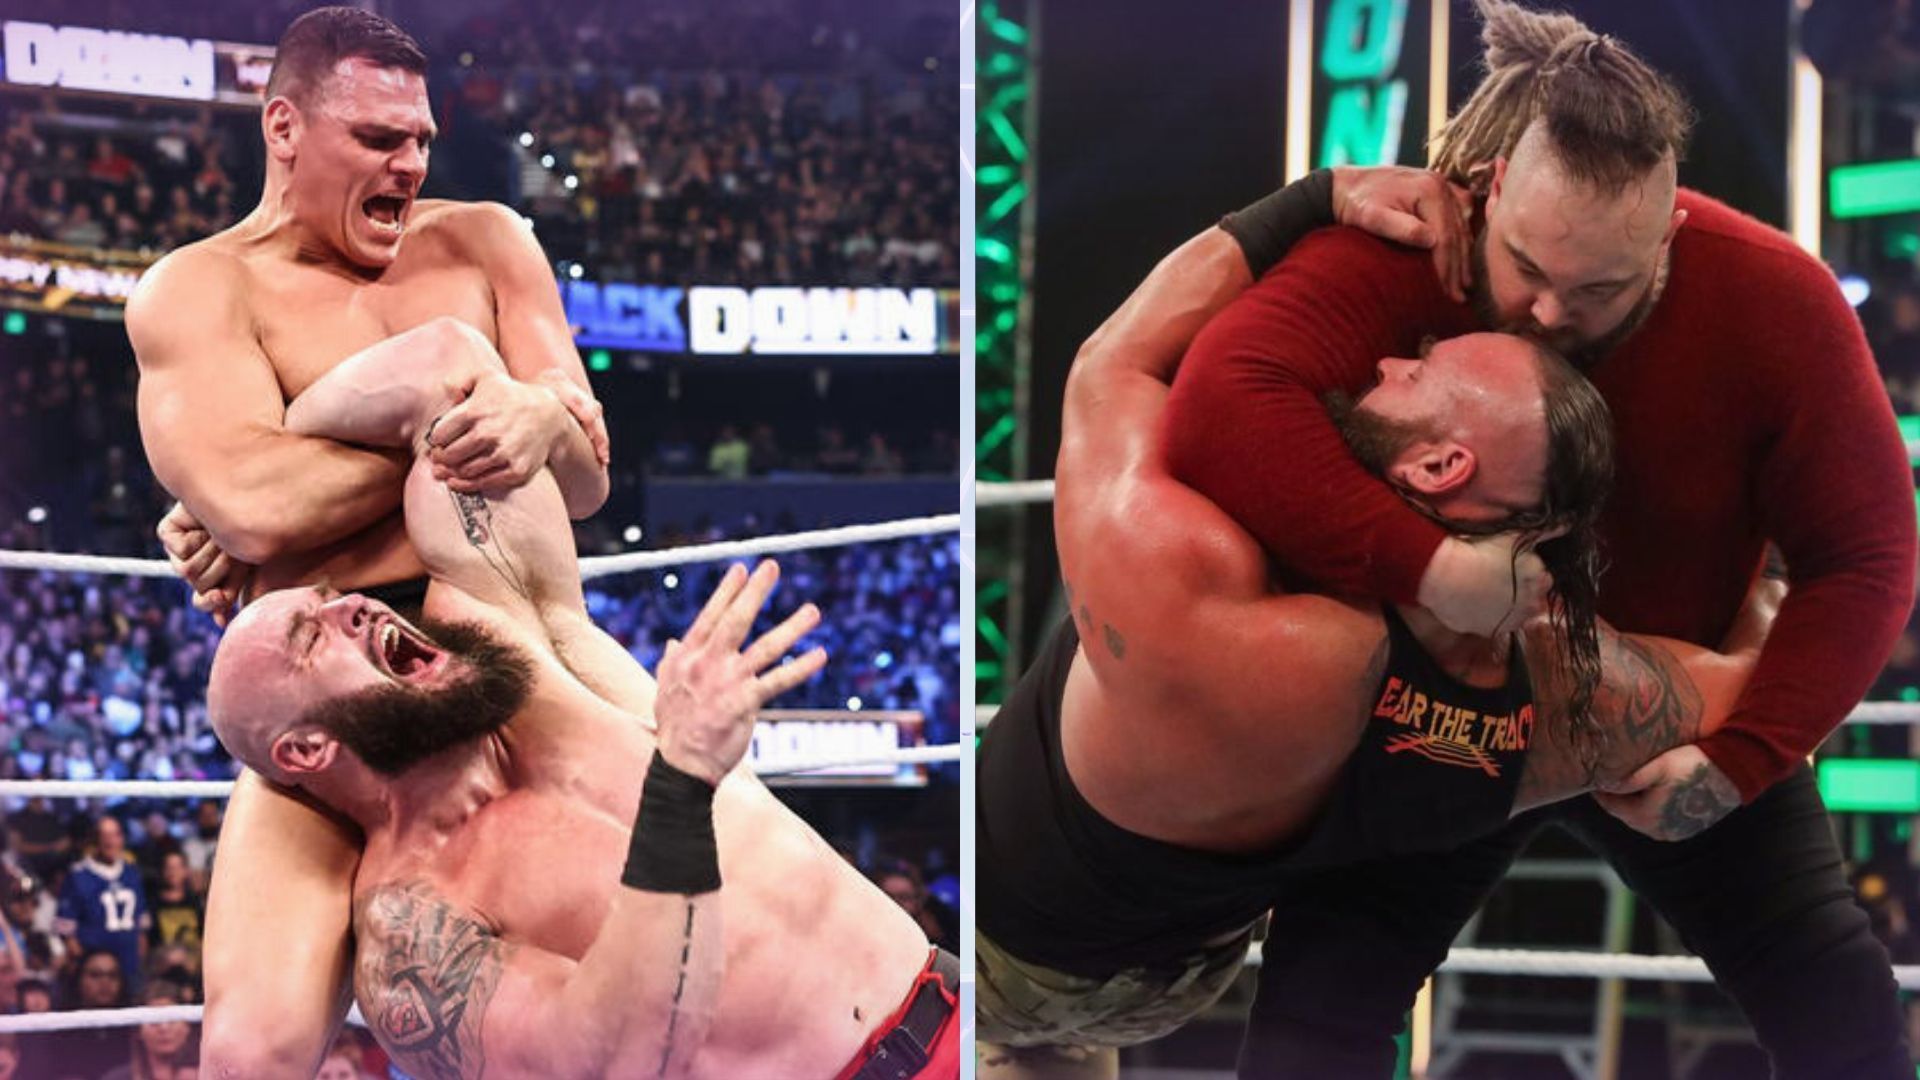 Braun Strowman lost on the latest episode of WWE SmackDown